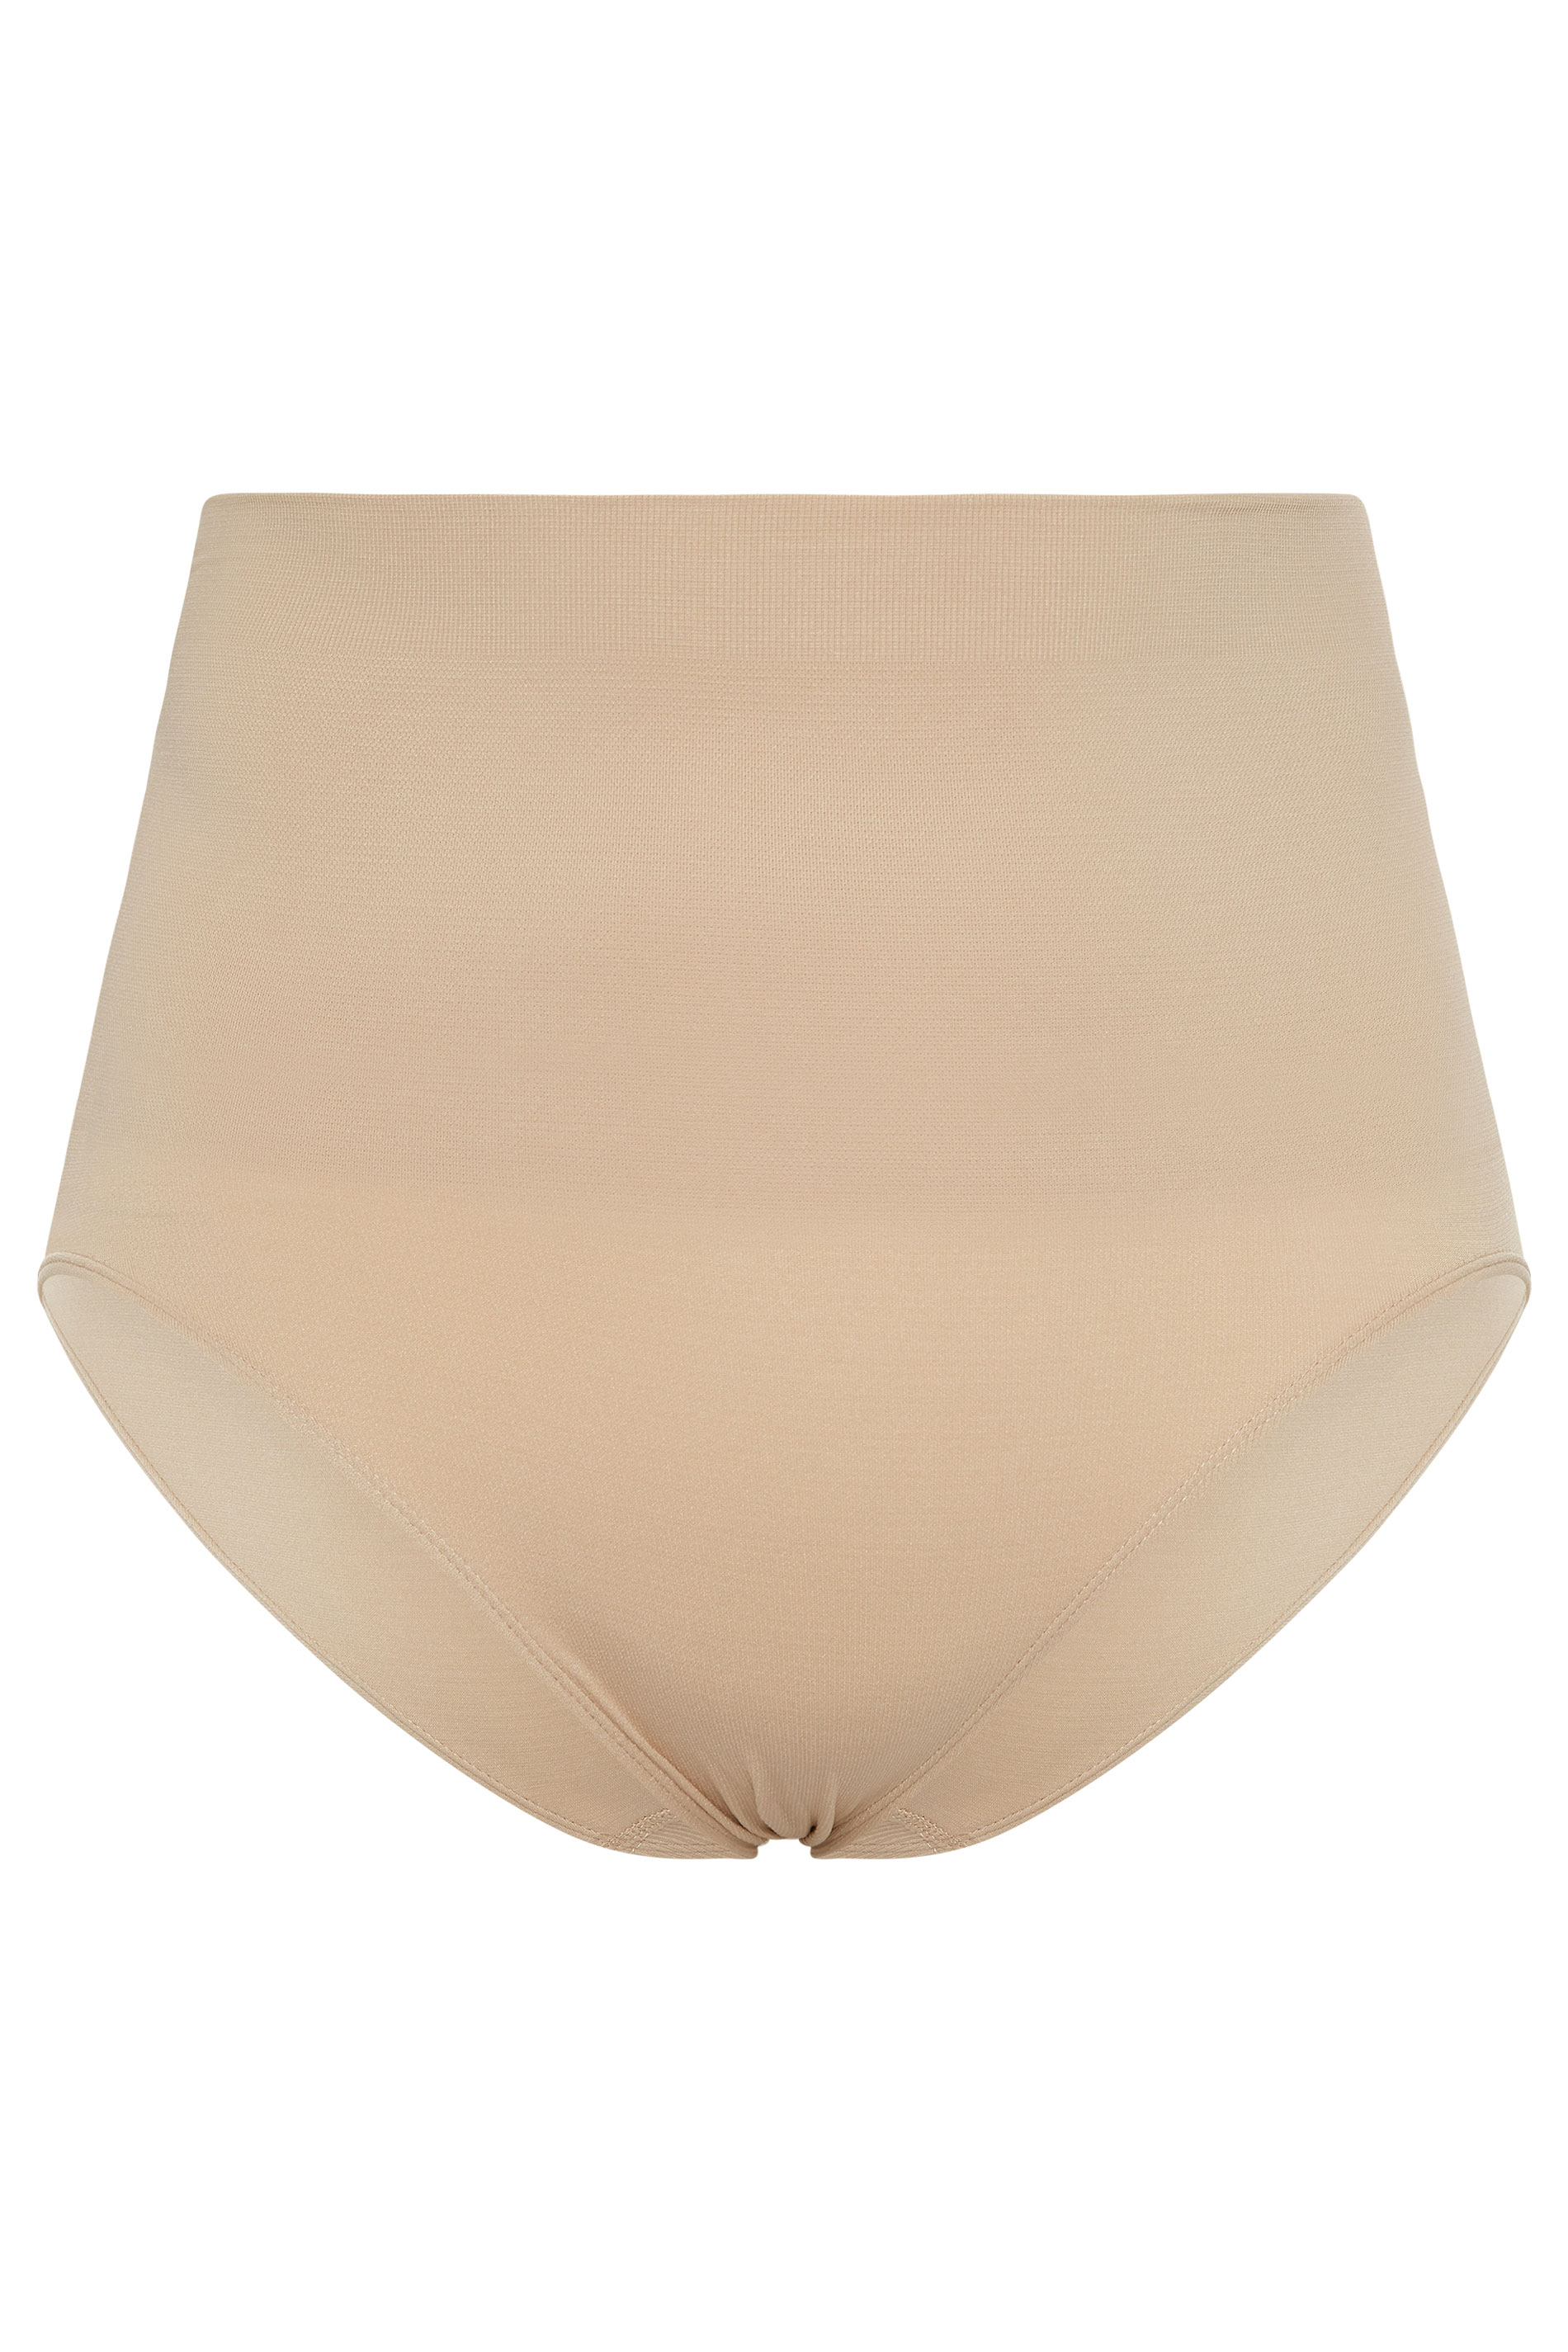 Plus Size Nude Seamless Control High Waisted Full Briefs | Yours Clothing